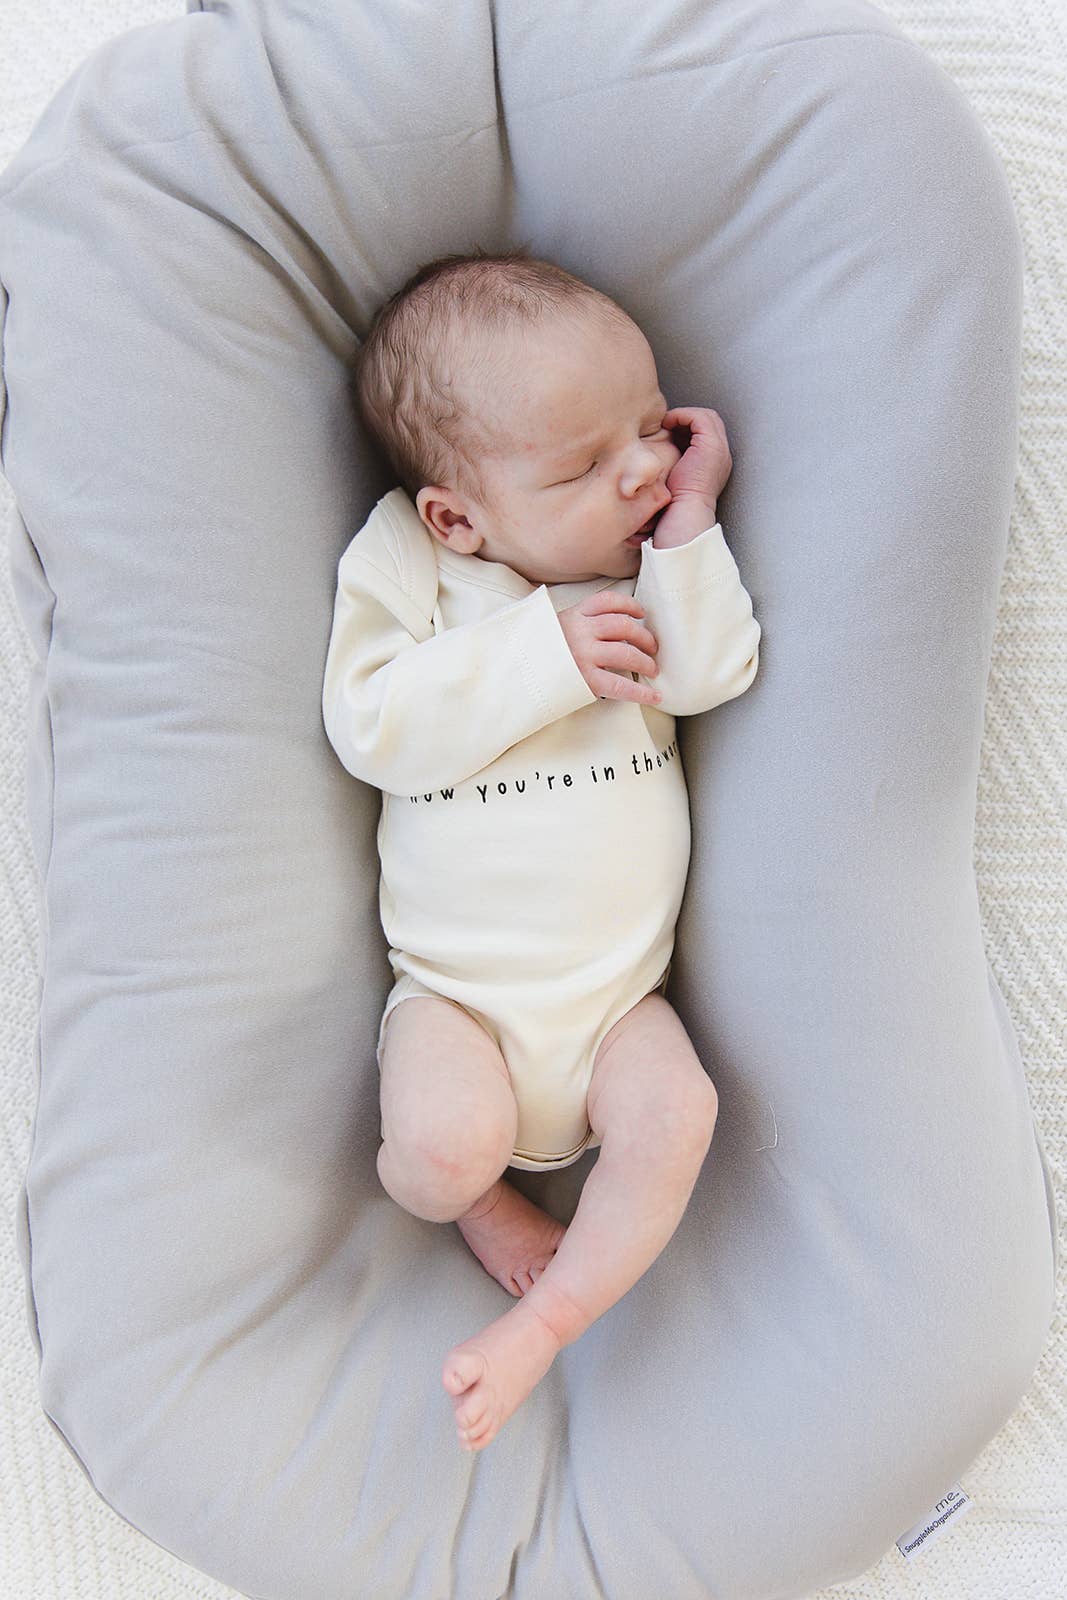 How Wonderful Life is Now You're in The World Organic Onesie: